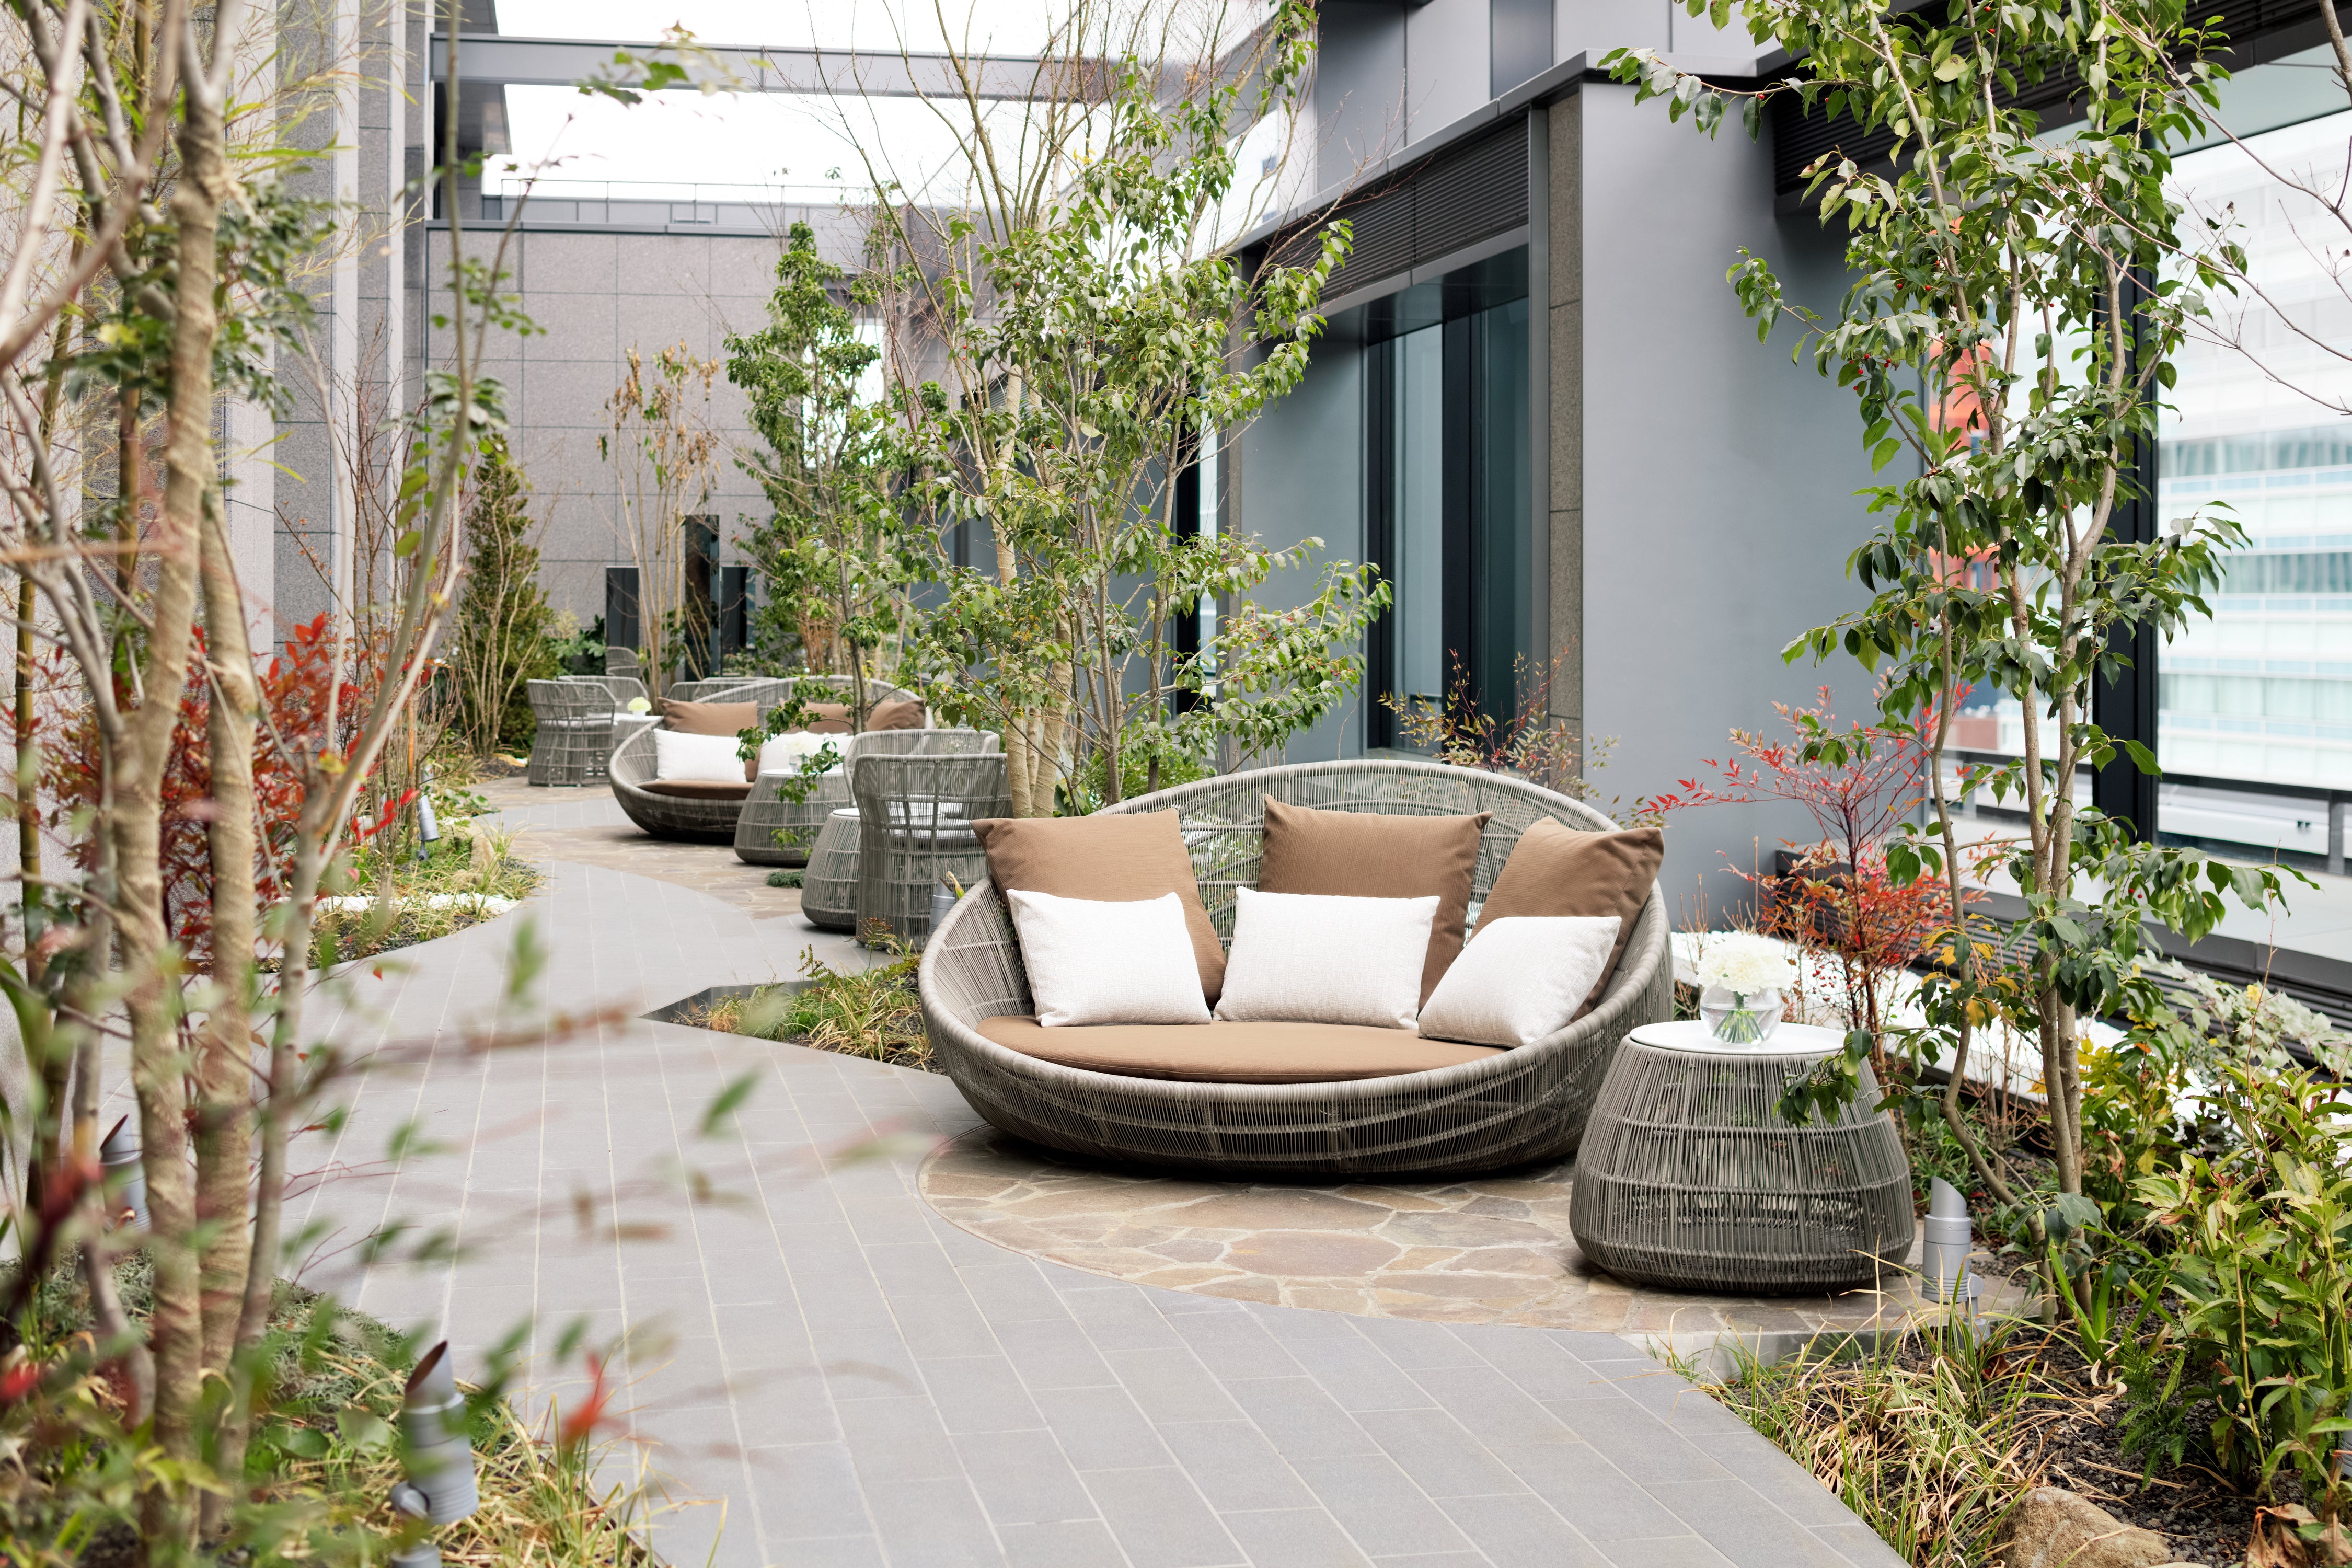 The garden terrace. Images by The Ascott Hotel.